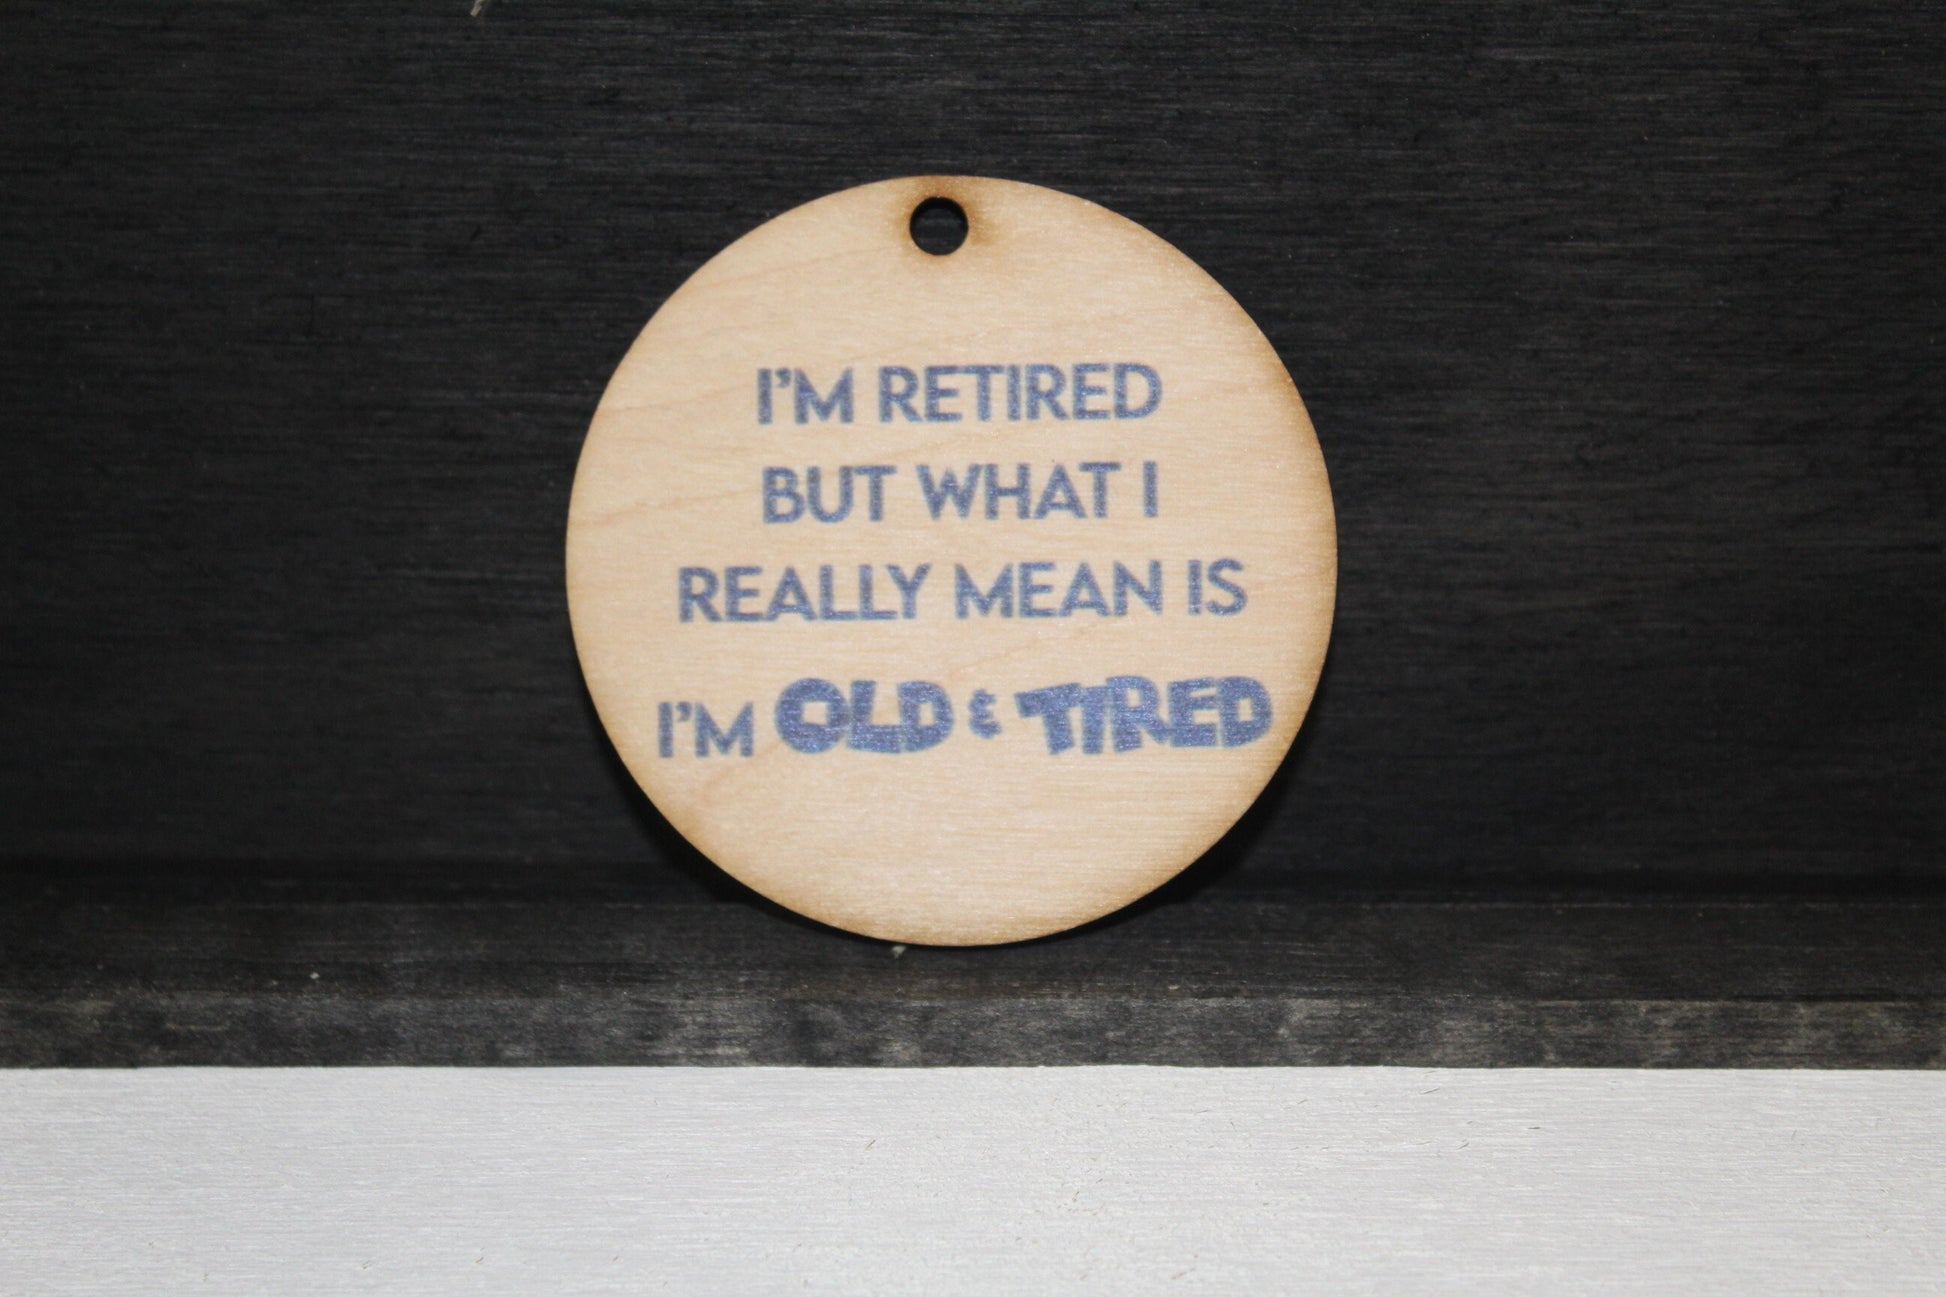 Retired Wood Slice UV Old and Tired Funny Printed Wooden Plaid Christmas Ornament Round Tree Rustic Primitive Silly Gift Retirement